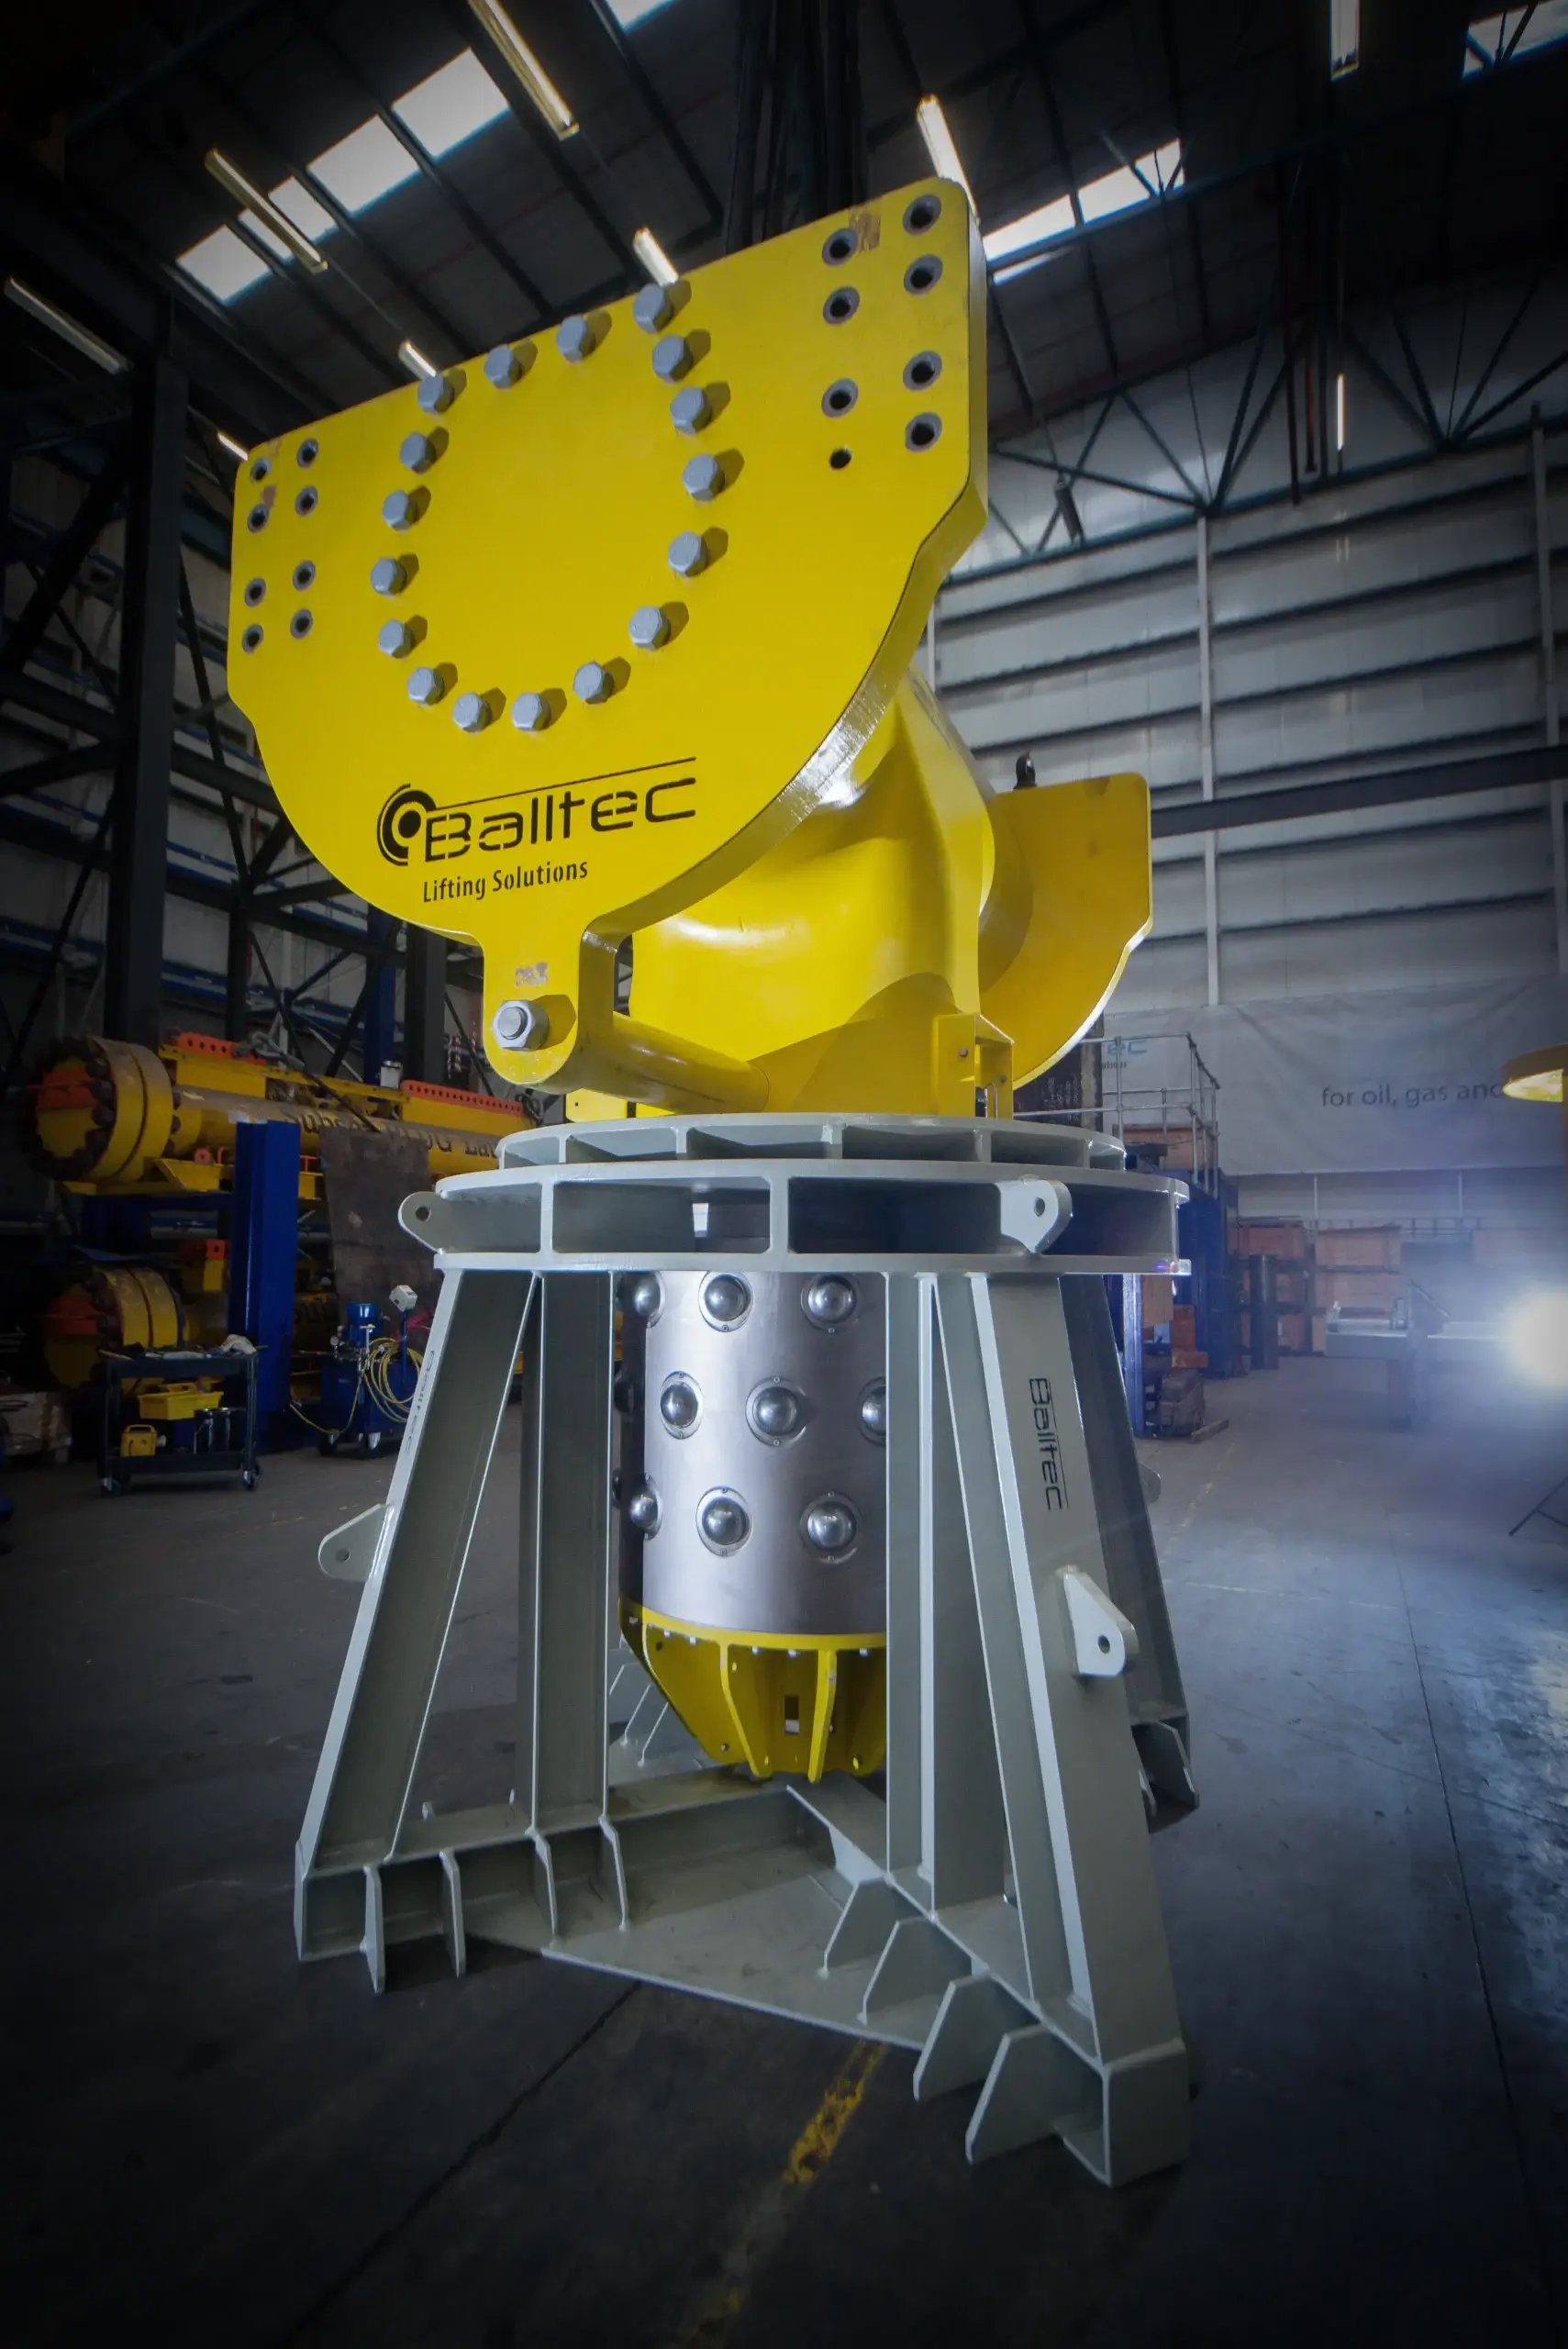 LiftLOK lifting subsea offshore quick connect connectors in cradle in workshop testing facility